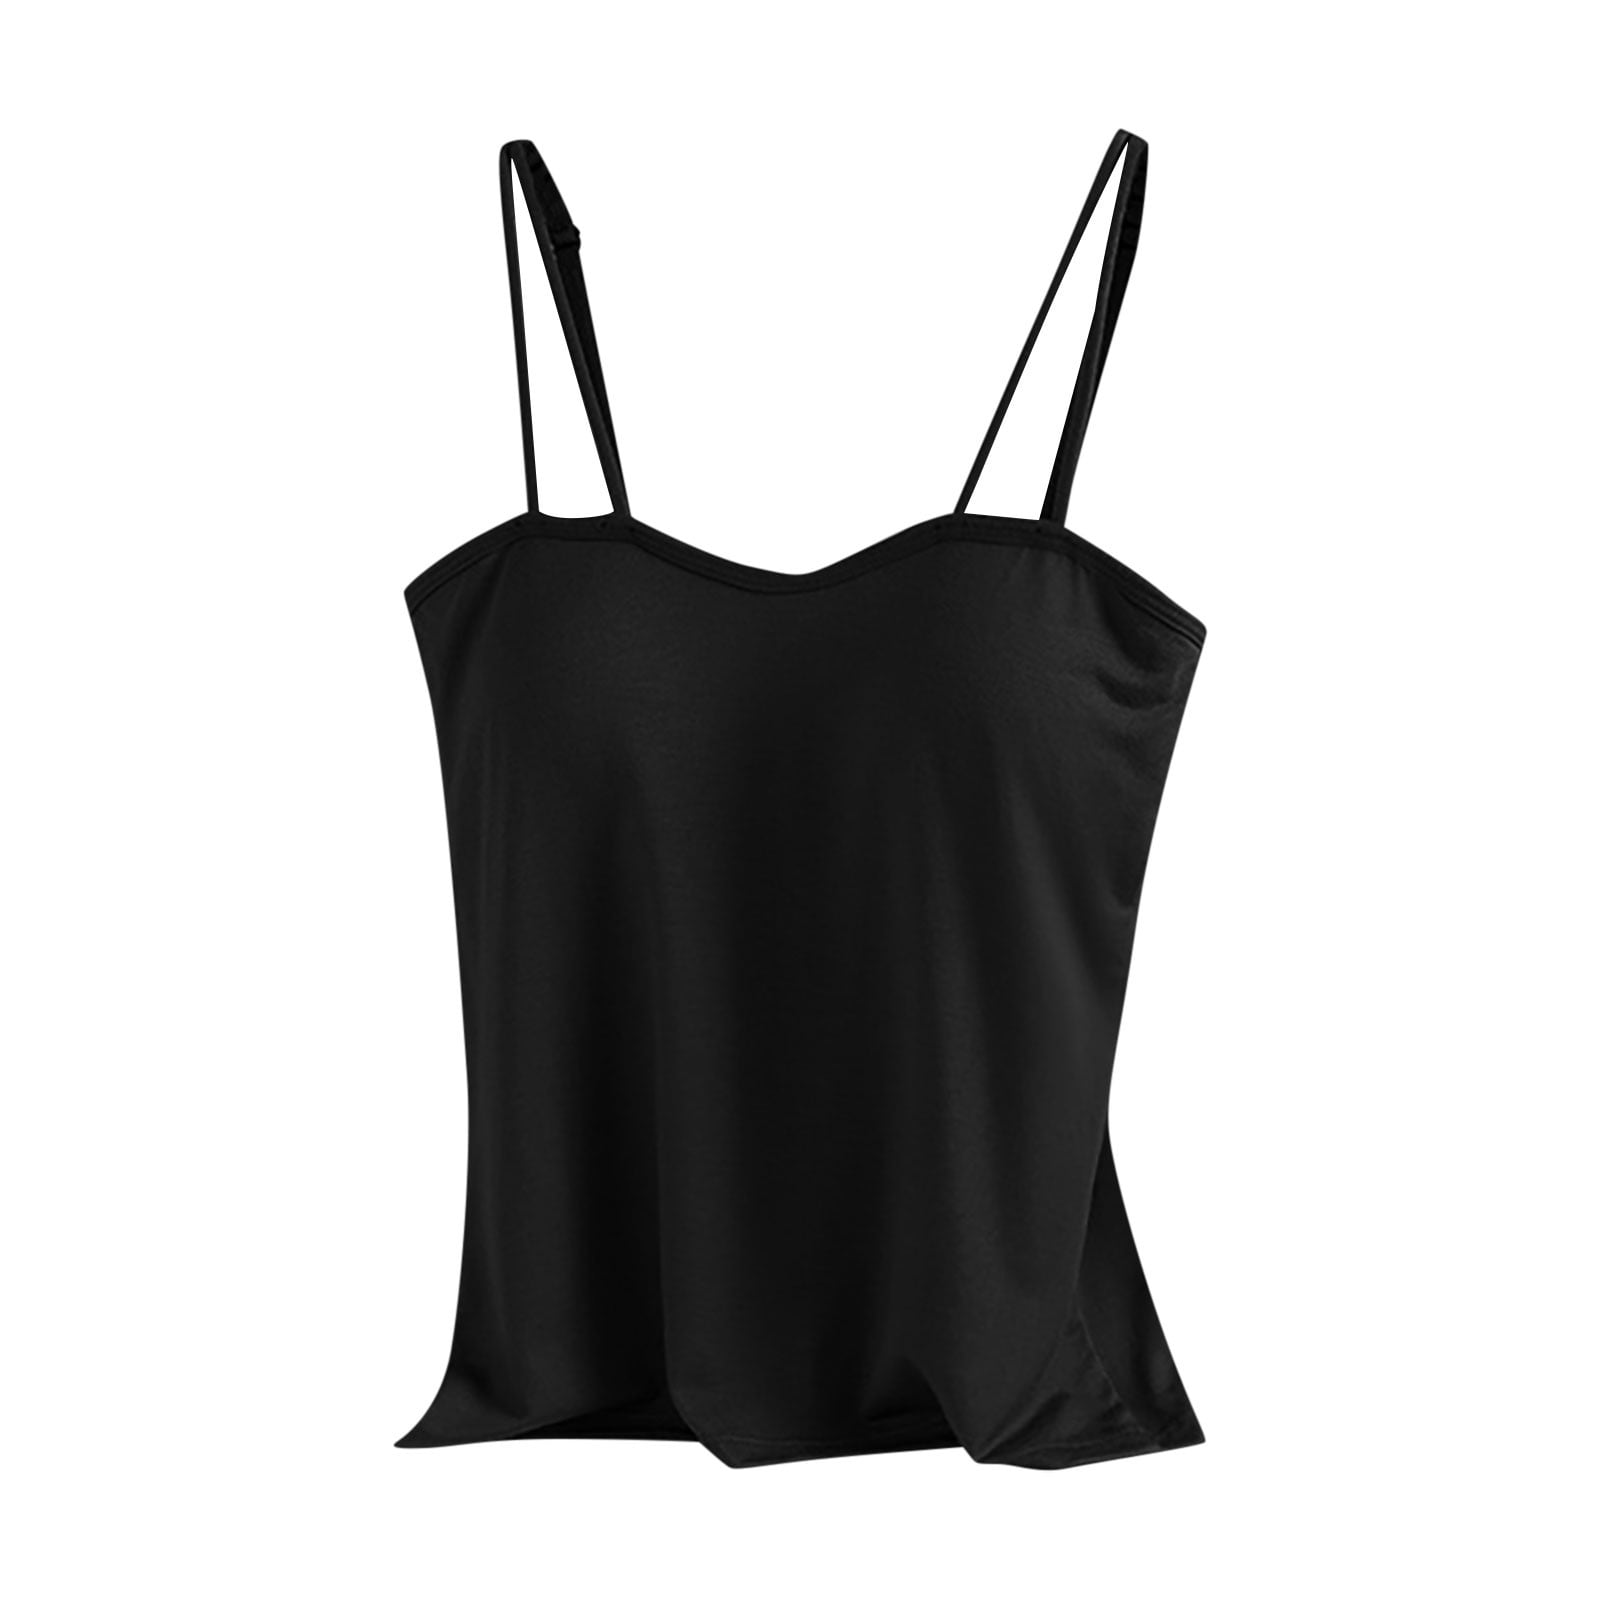 AherBiu Womens Plus Size Tank Tops with Built in Bra Basic Layer Comfy ...